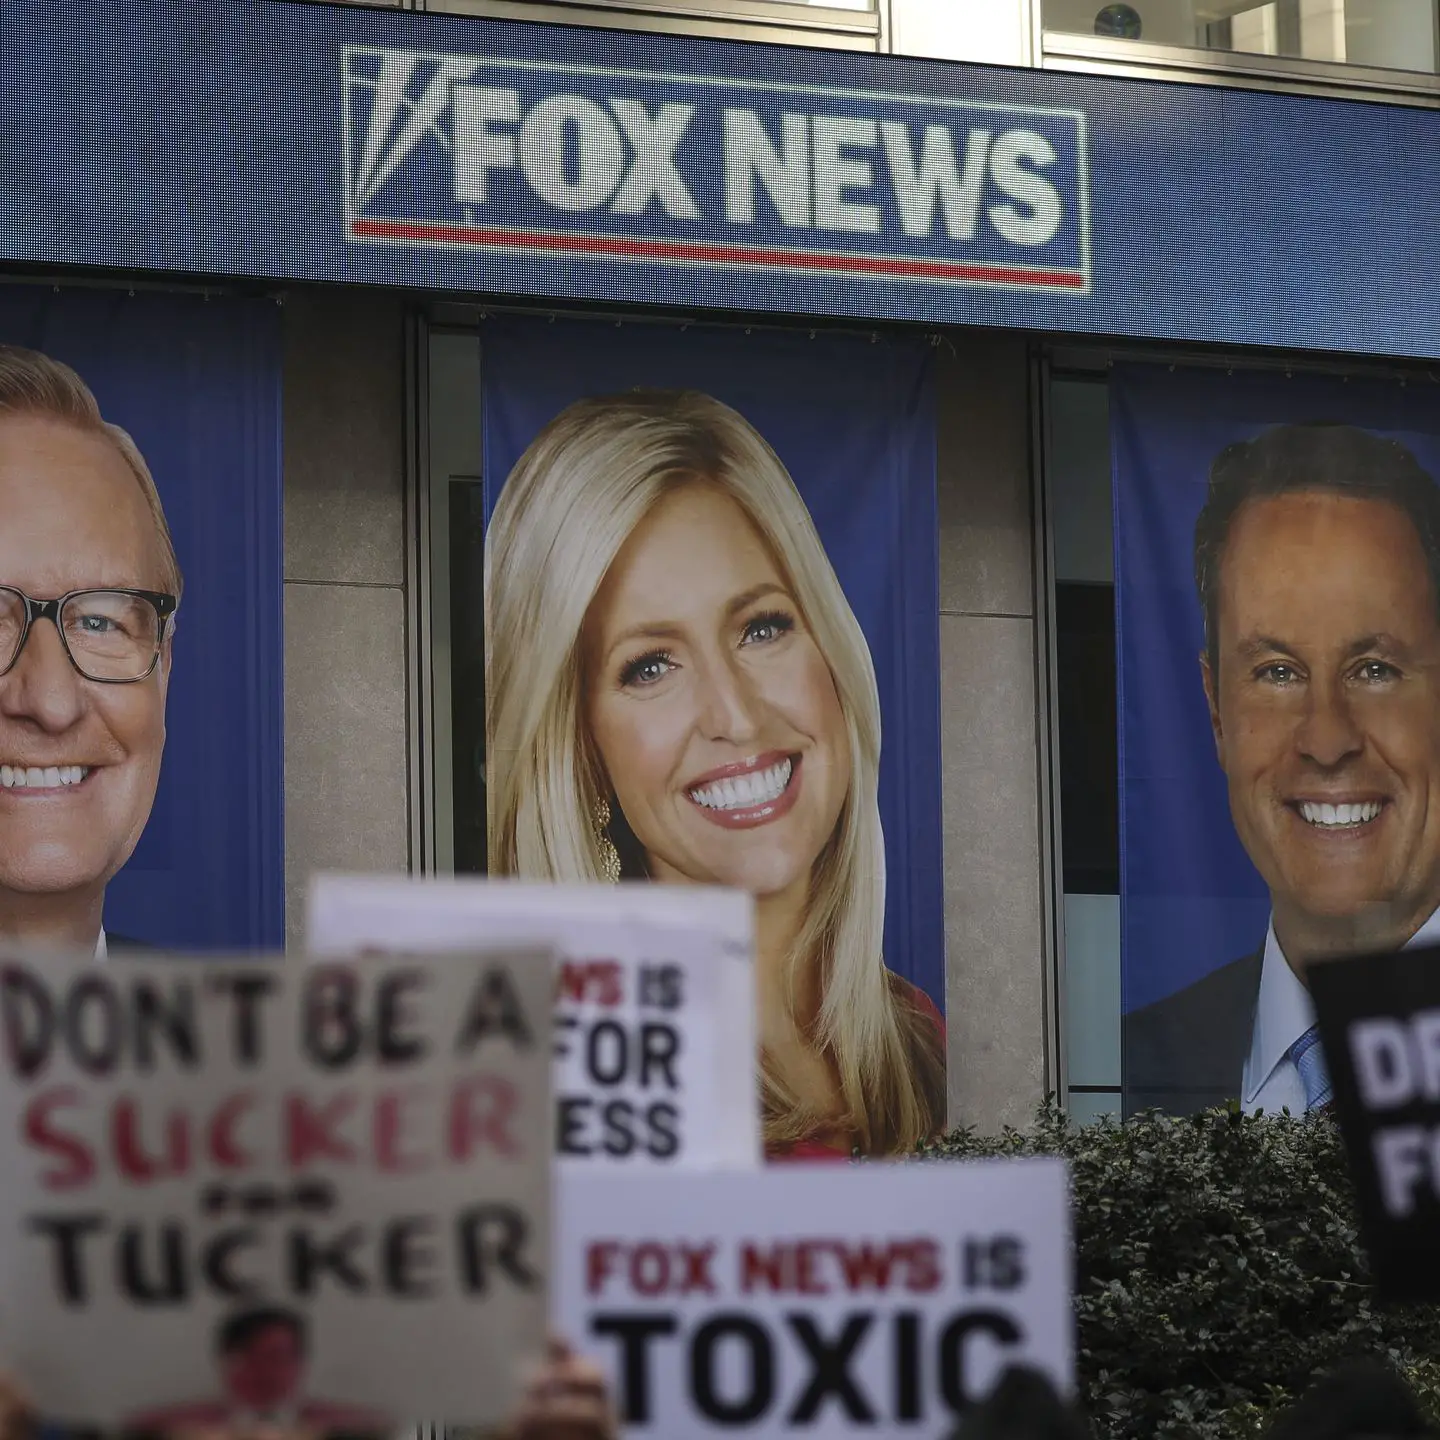 Trump doesnt get the Fox News scam